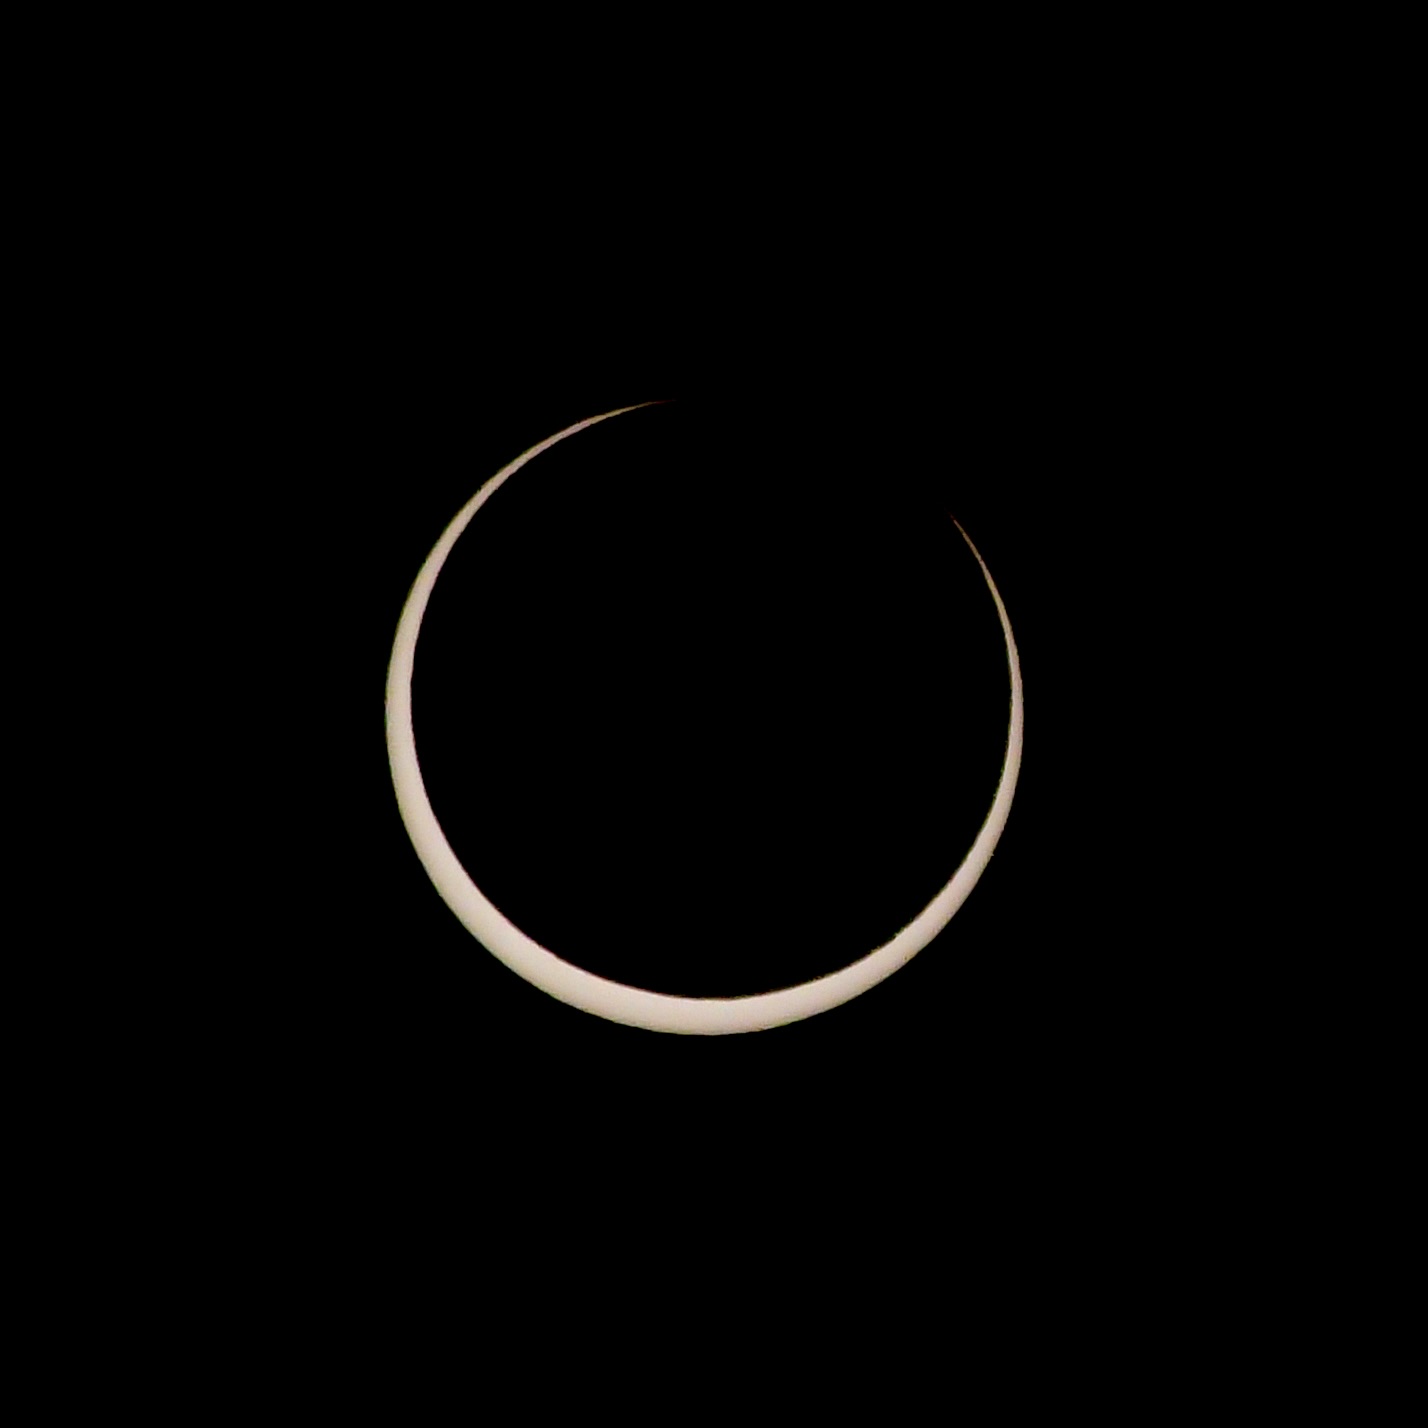 thin crescent sun as the moon is almost centered over it